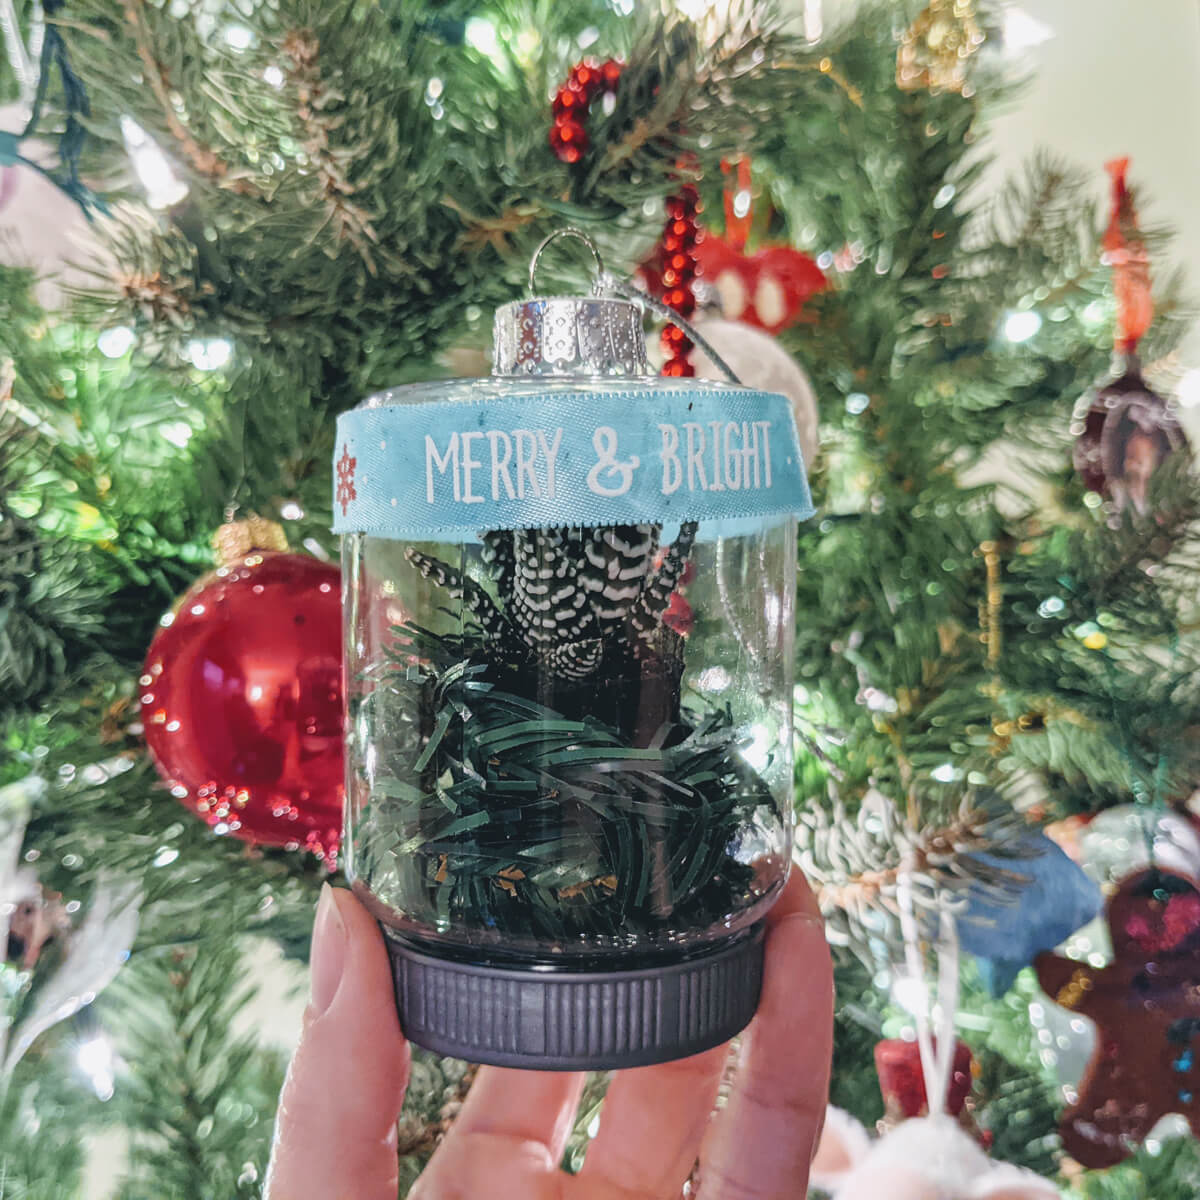 Homemade Succulent Christmas Ornament on the Tree